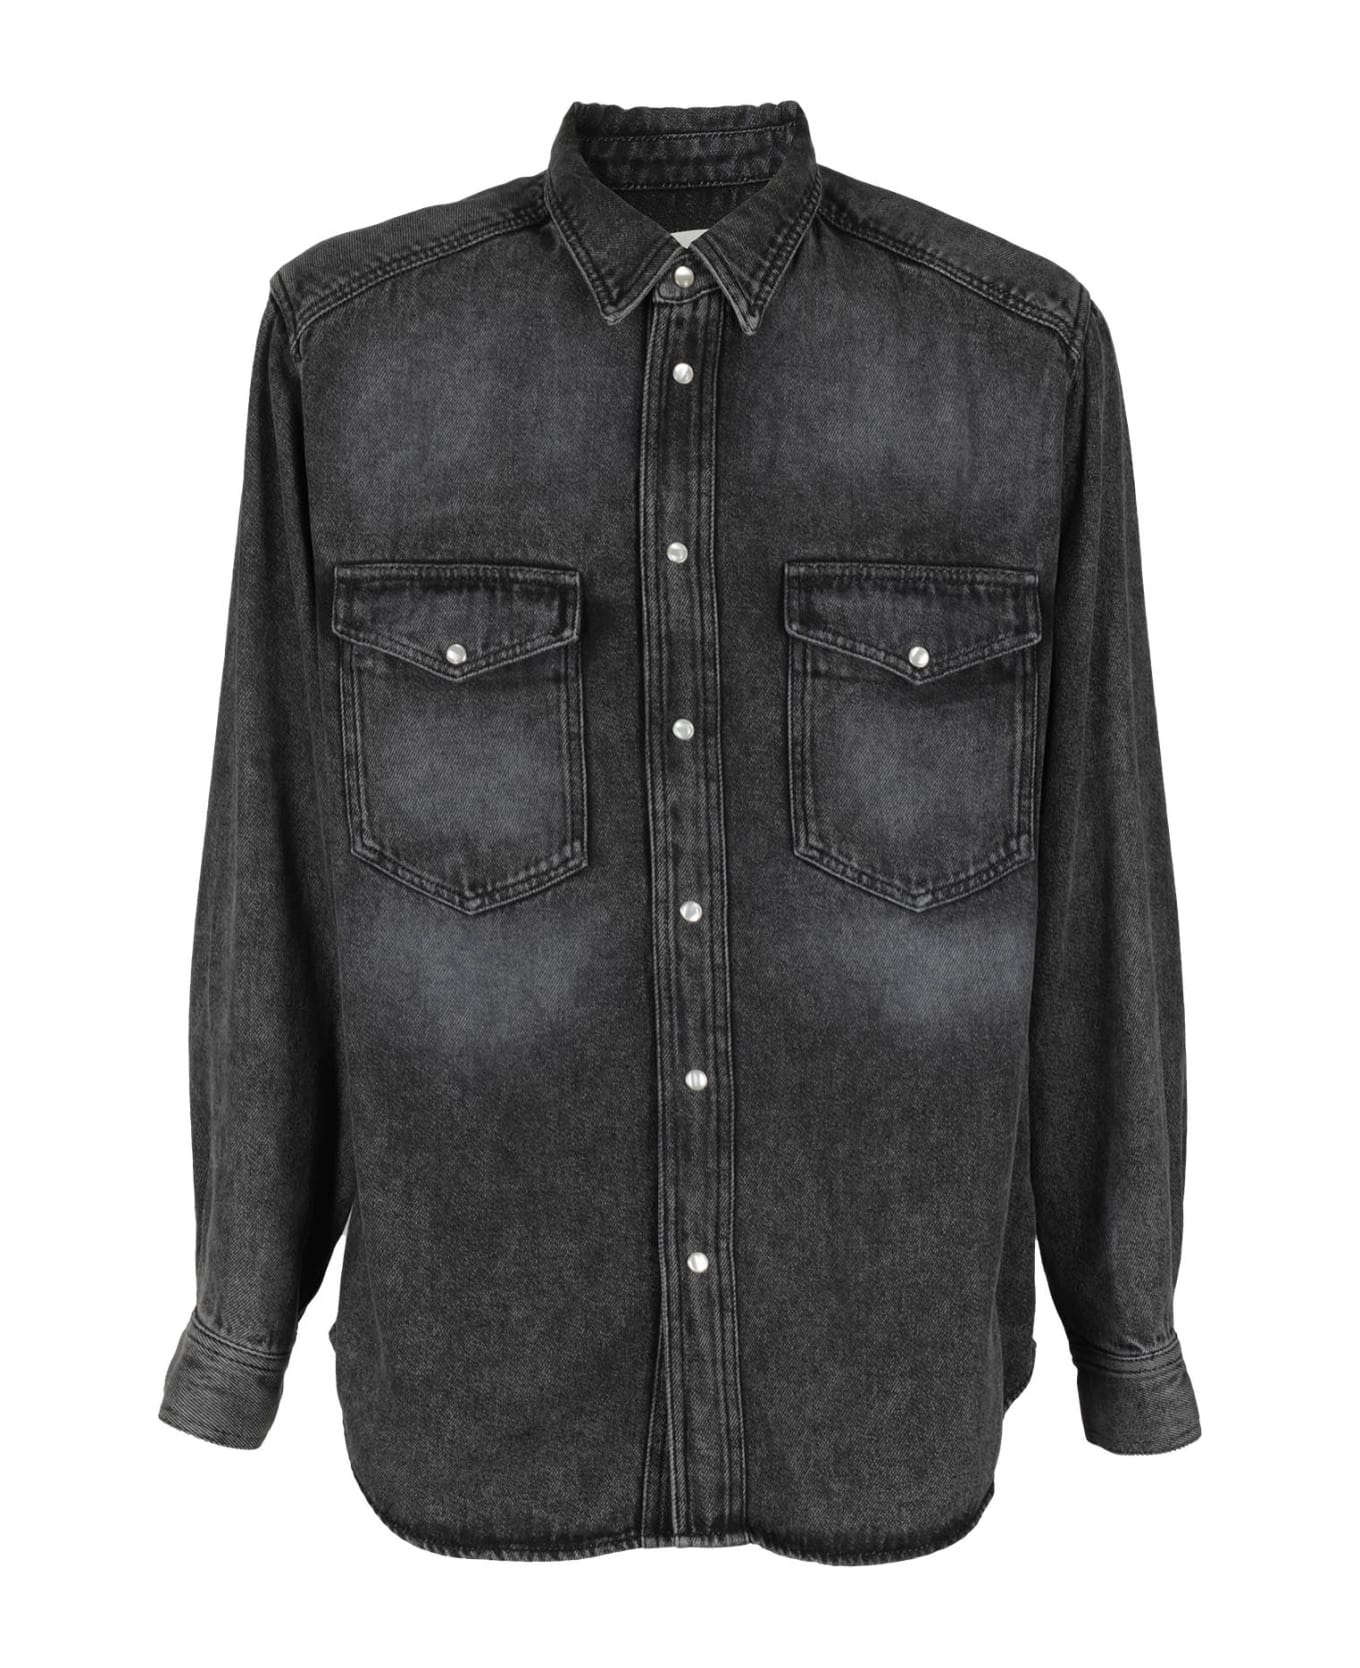 Isabel Marant Tailly Shirt - Gy